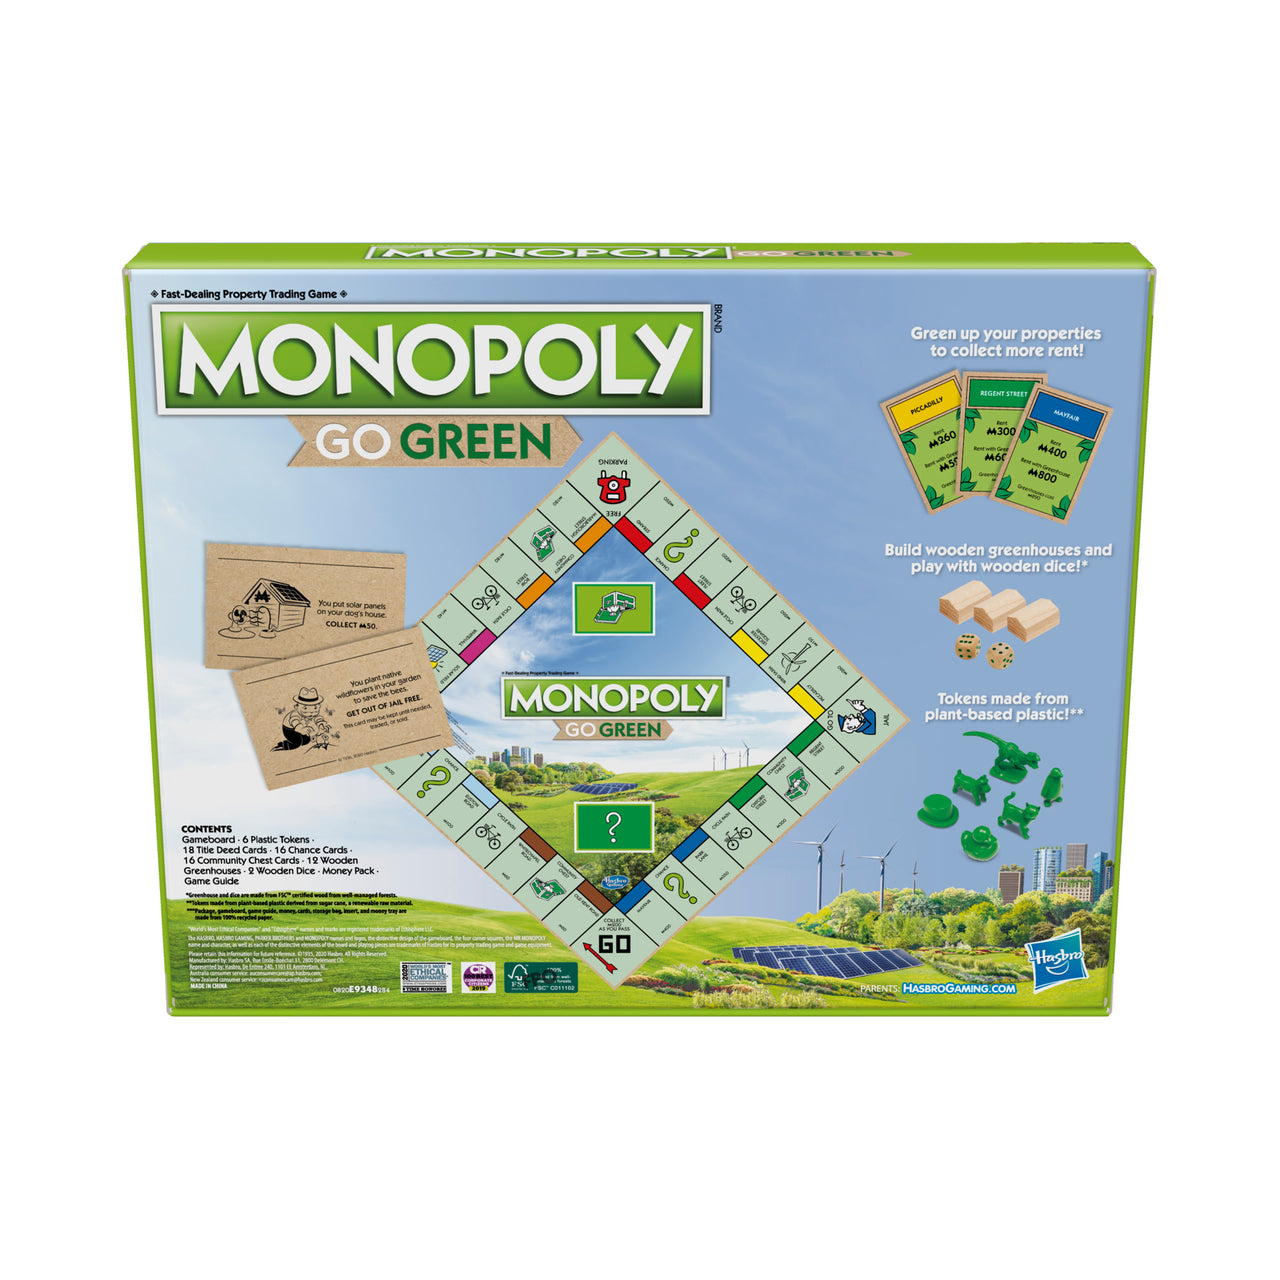 Monopoly Go Green Board Game, For 2-6 Players